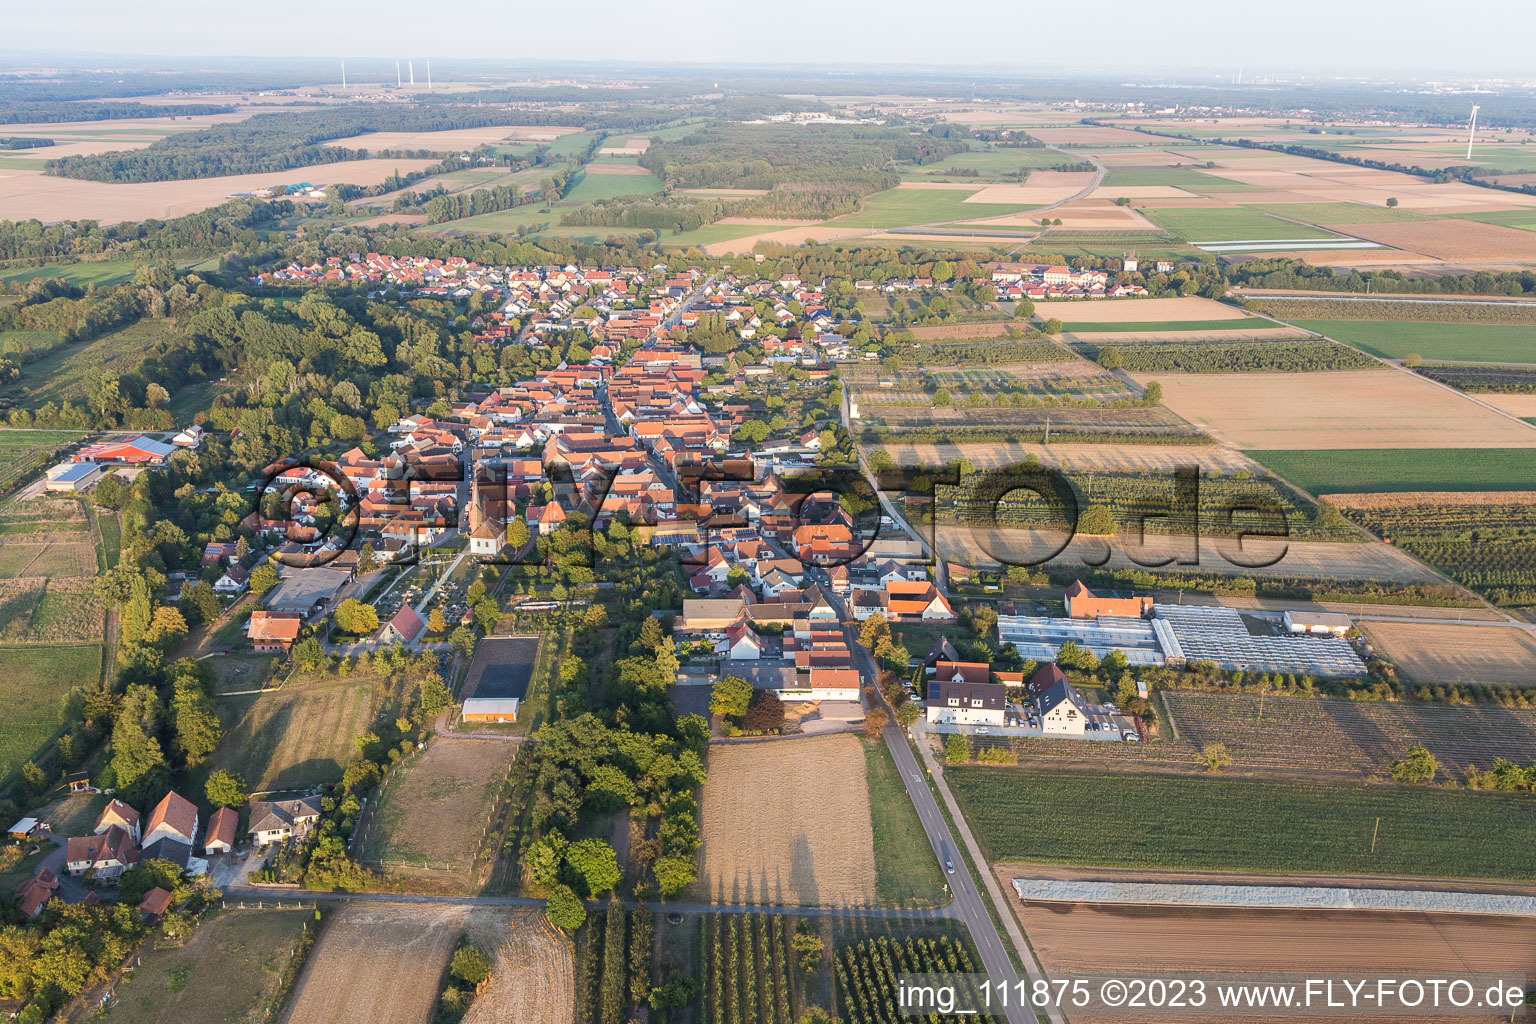 Winden in the state Rhineland-Palatinate, Germany seen from a drone